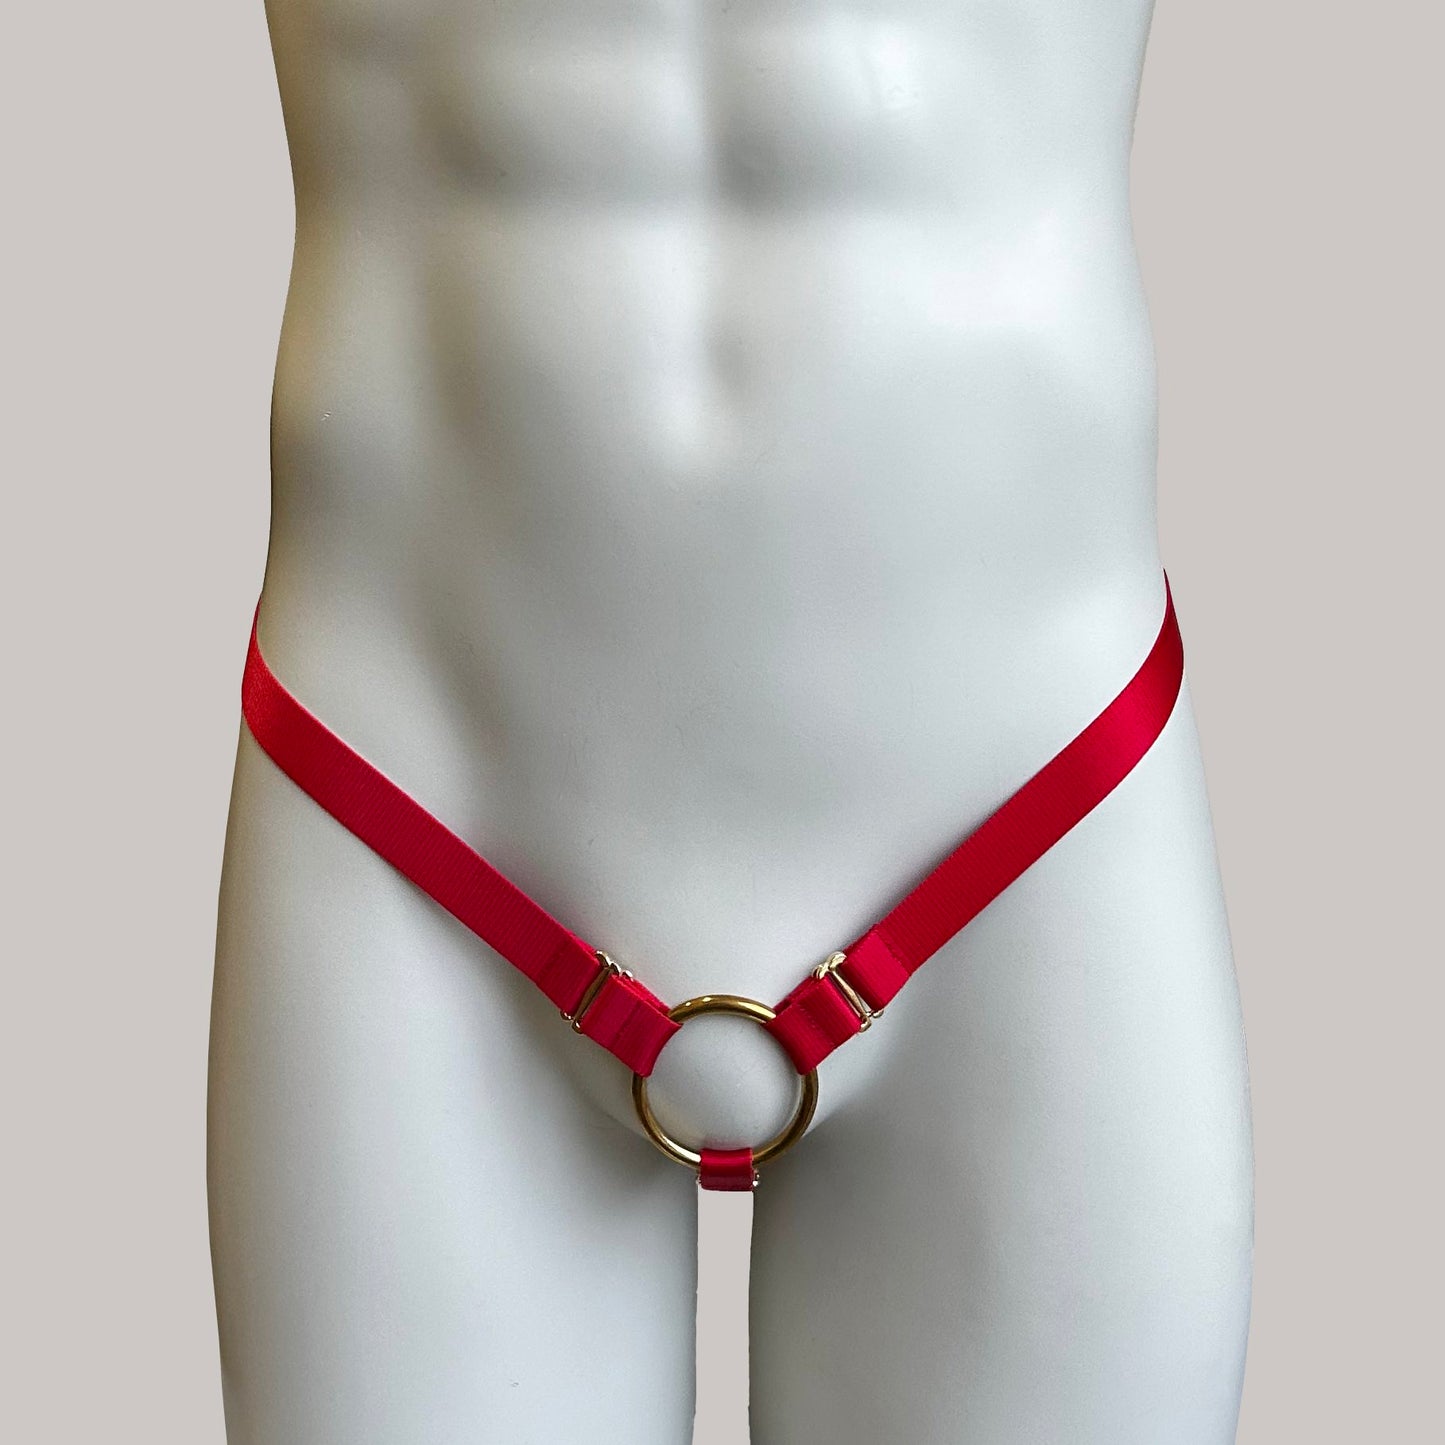 Male Three Straps Thong Chastity Cage Belt Red